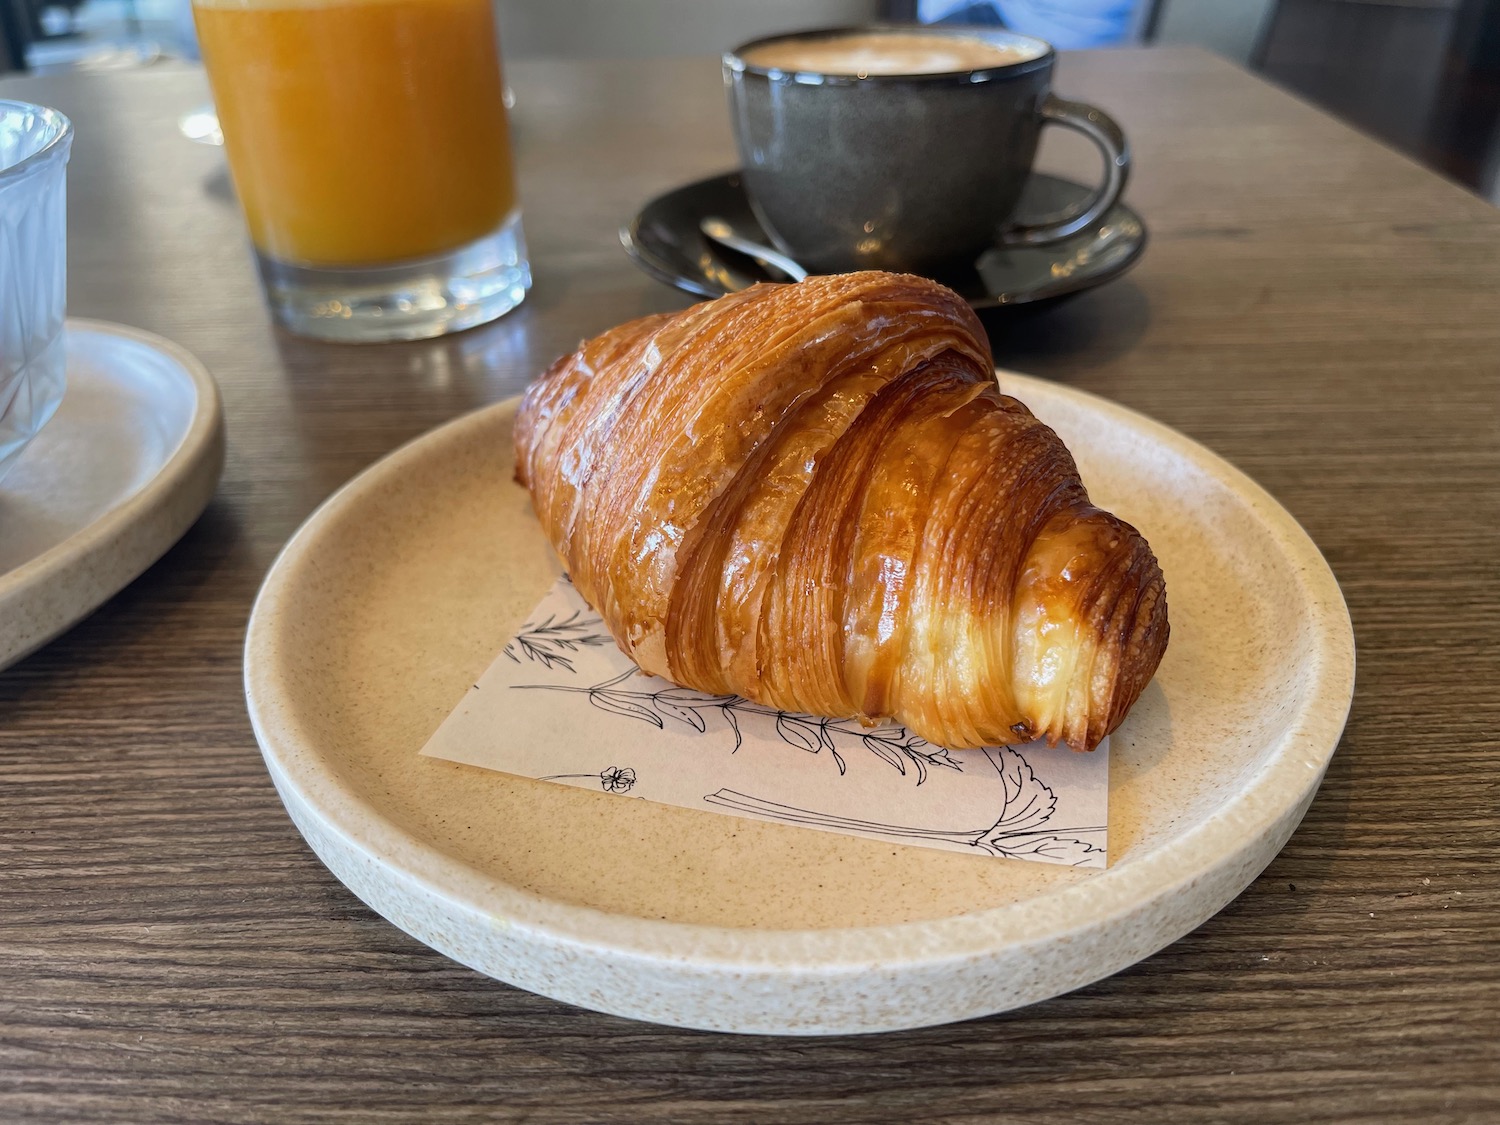 a croissant on a plate next to a cup of coffee